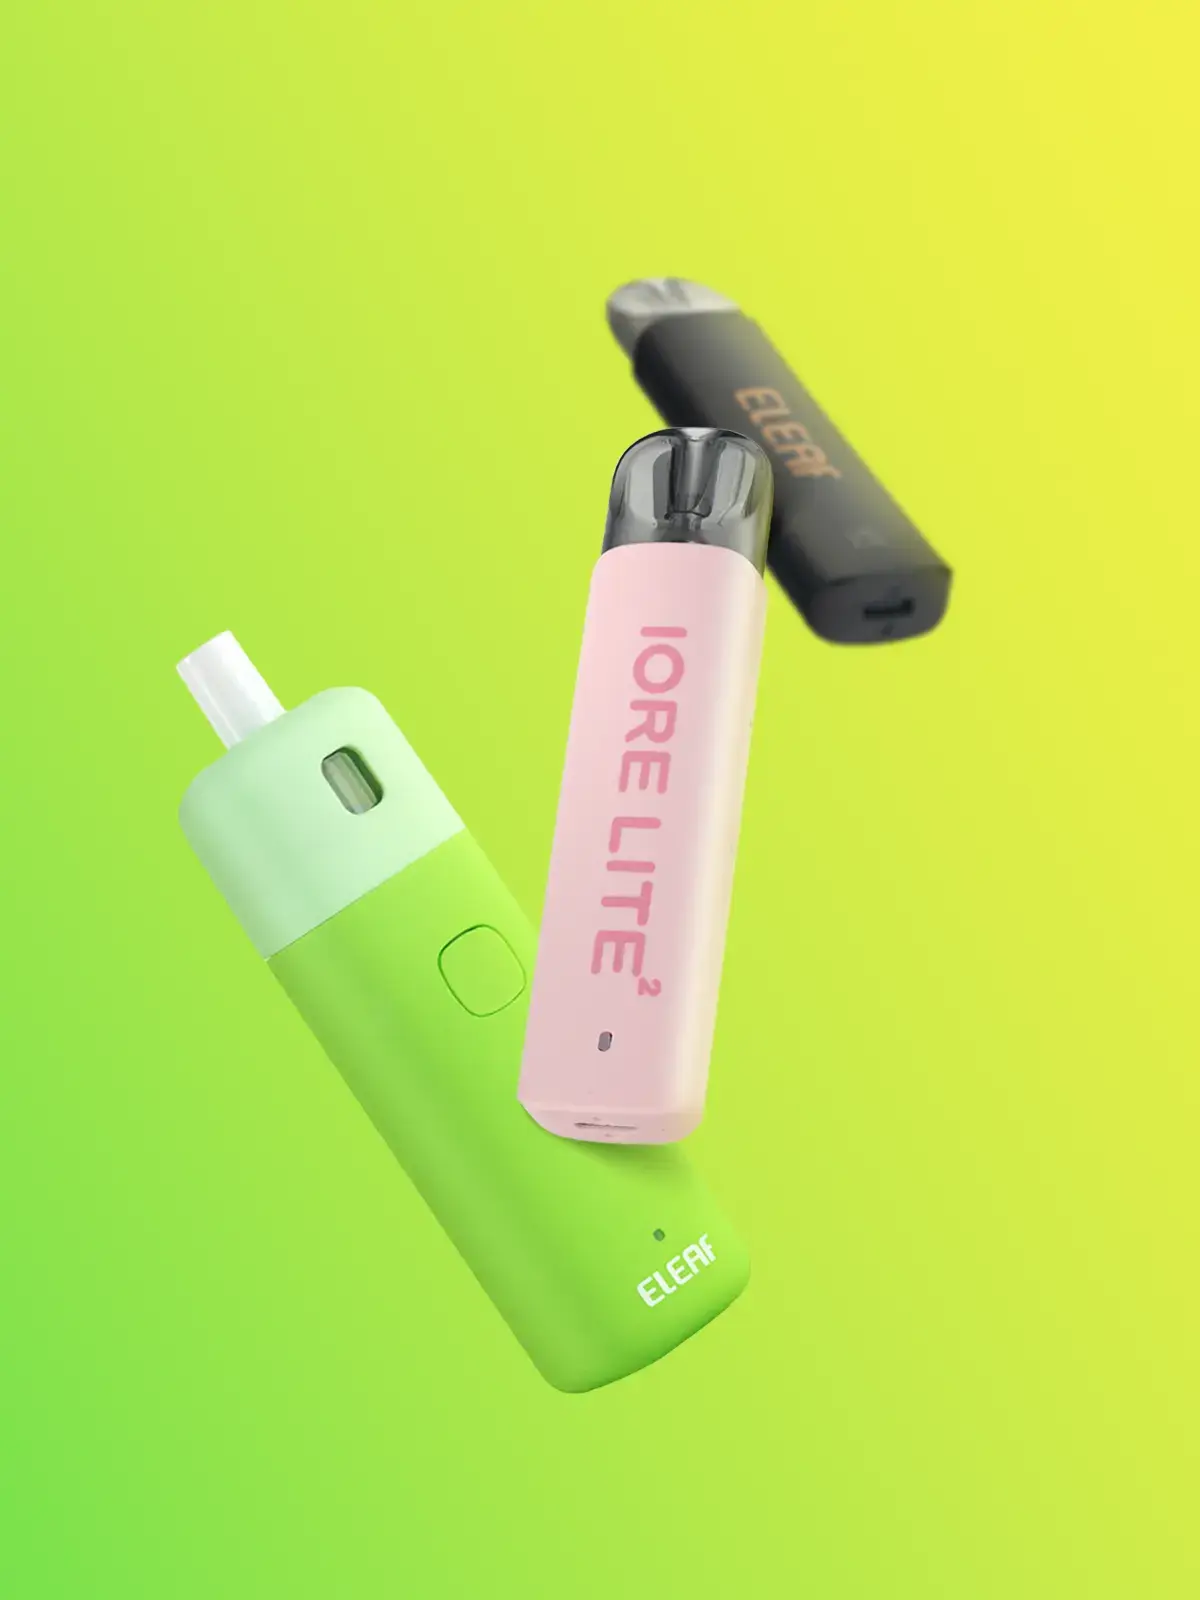 Three Eleaf devices; the IORE Qube and two IORE Lite 2 devices floating in front of a bright green background 